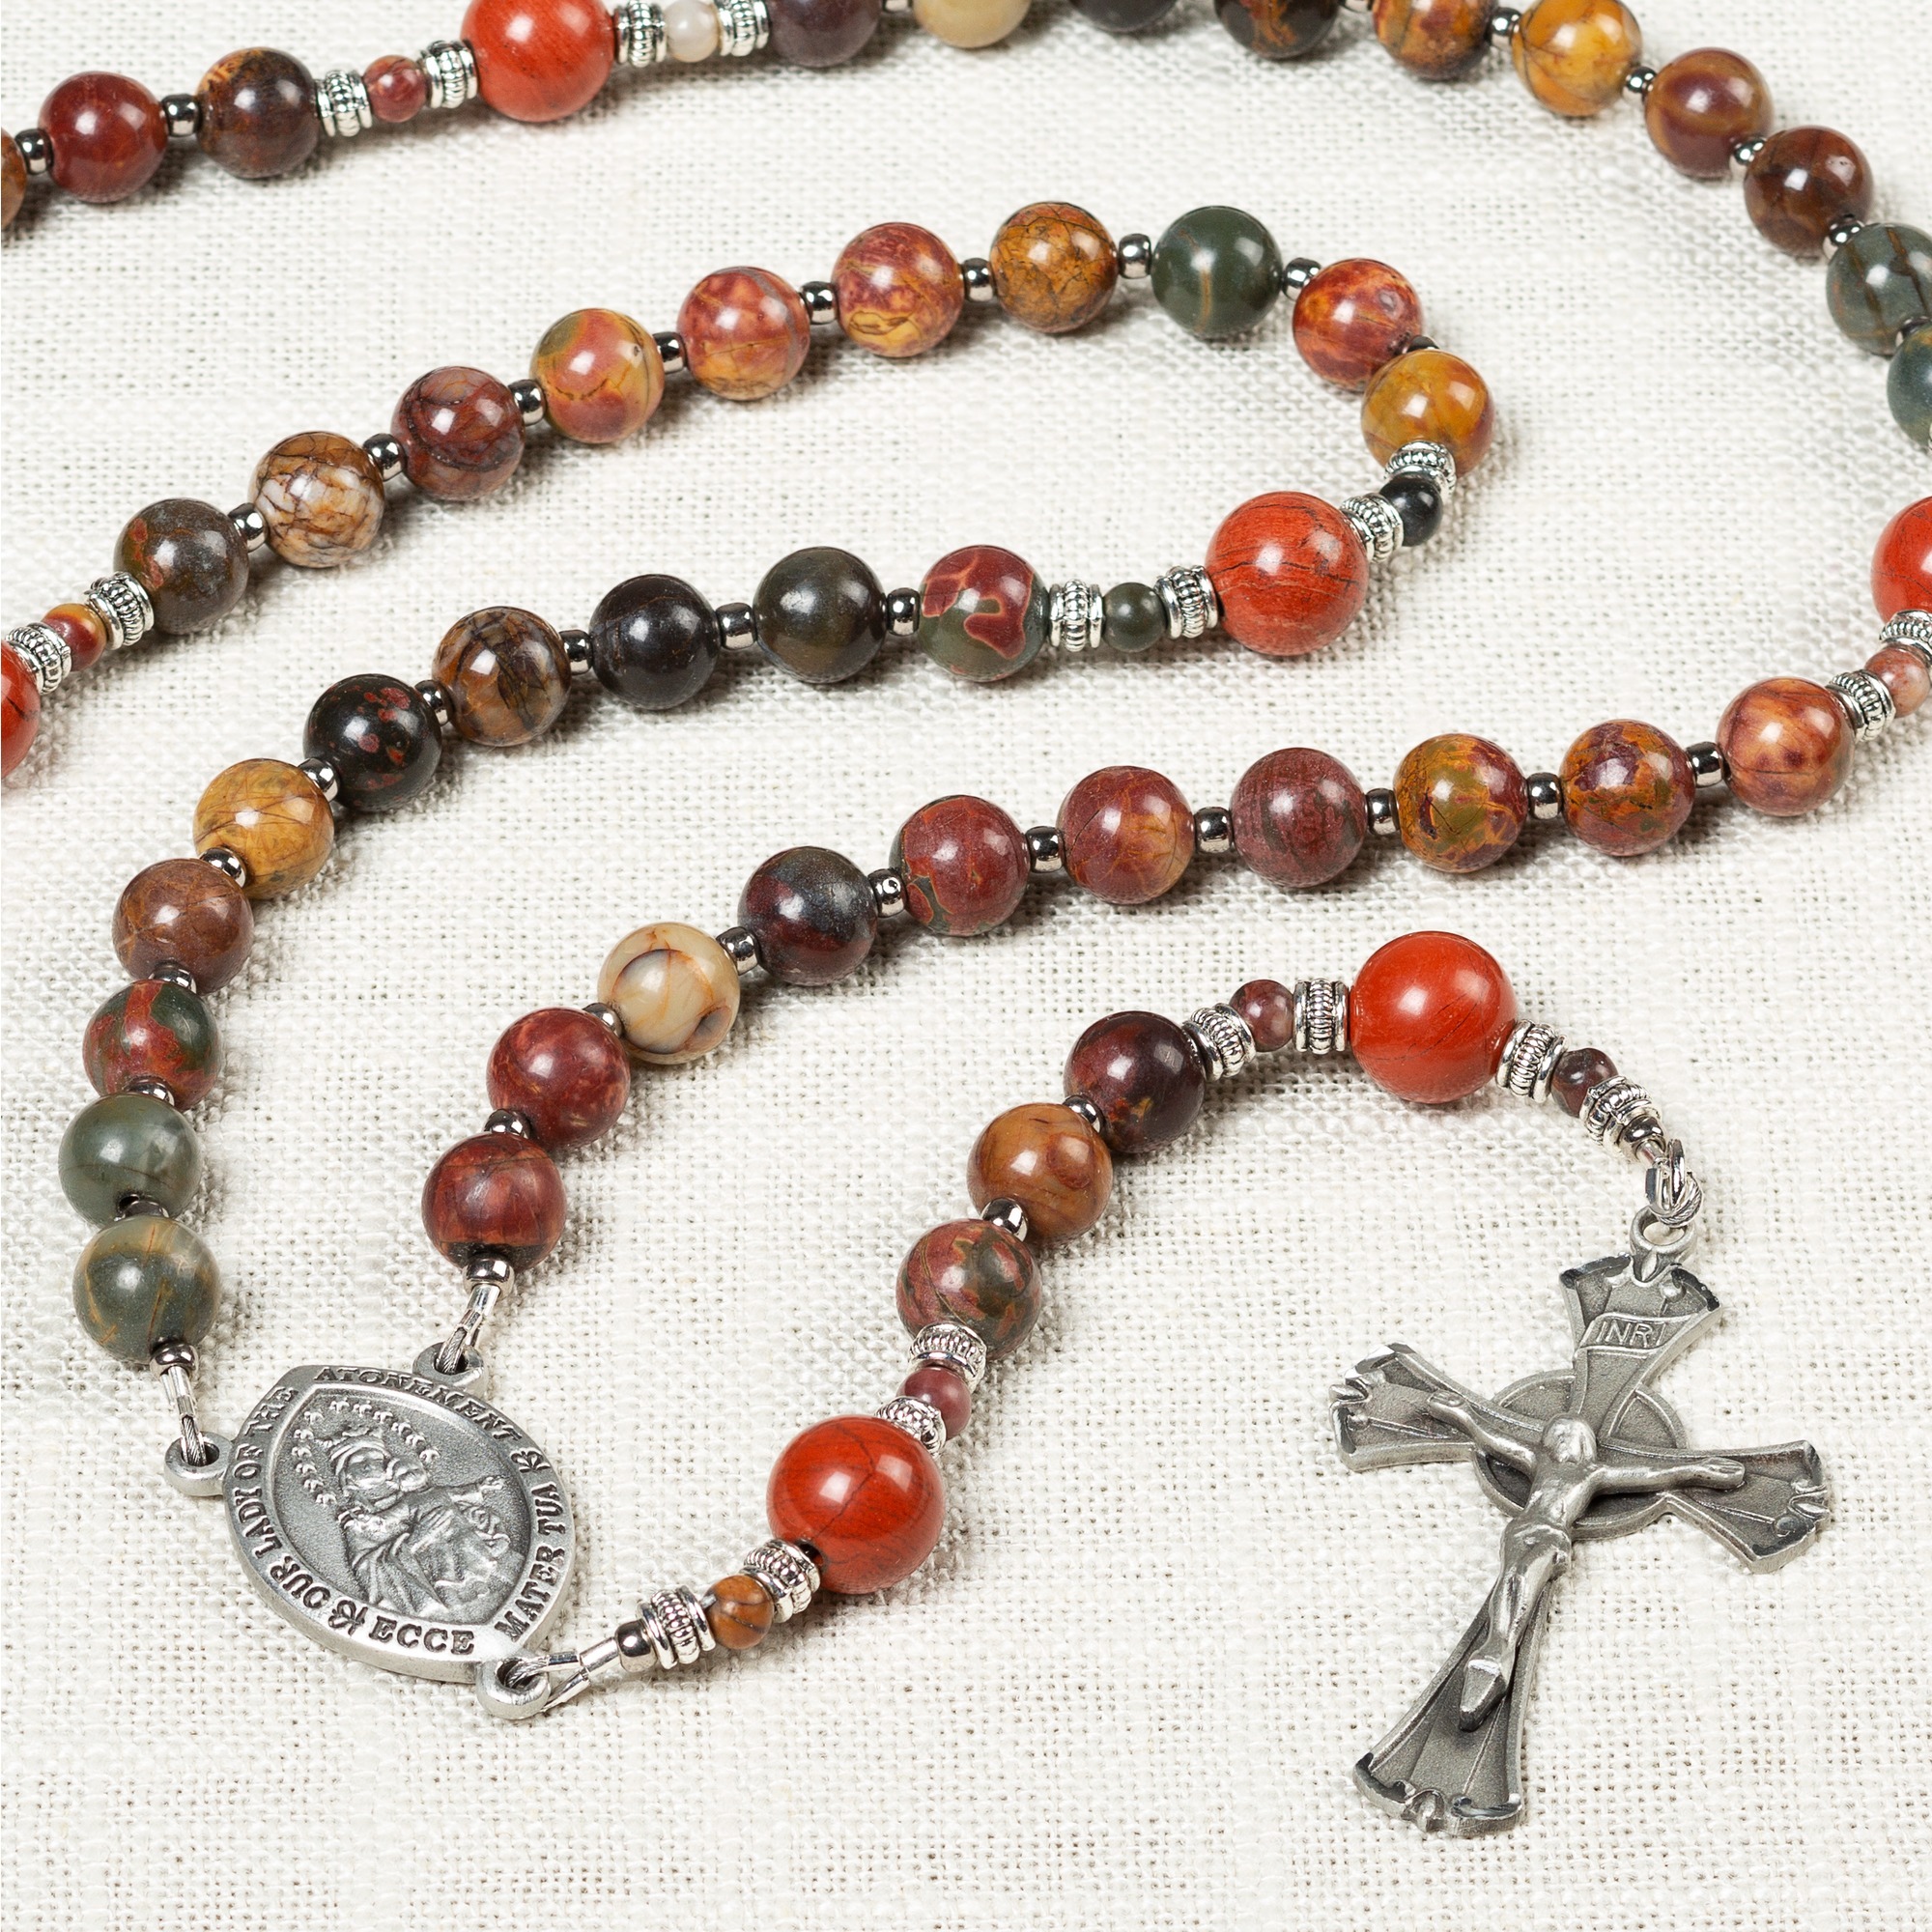 Our Lady of the Atonement Rosary | The Catholic Company®